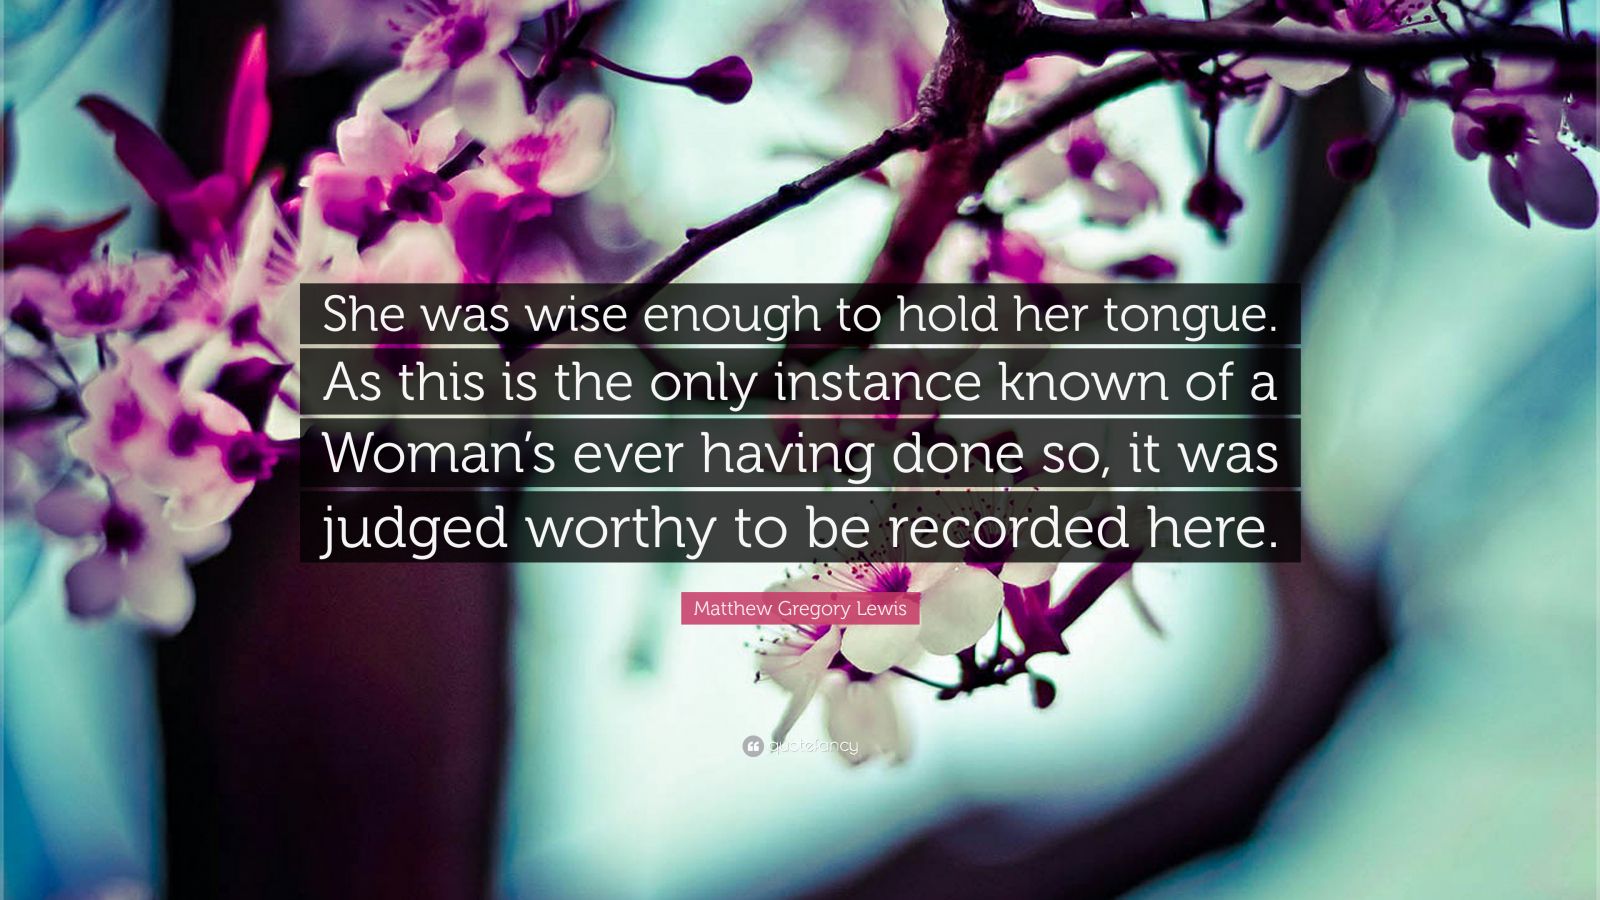 Matthew Gregory Lewis Quote: “She was wise enough to hold her tongue ...